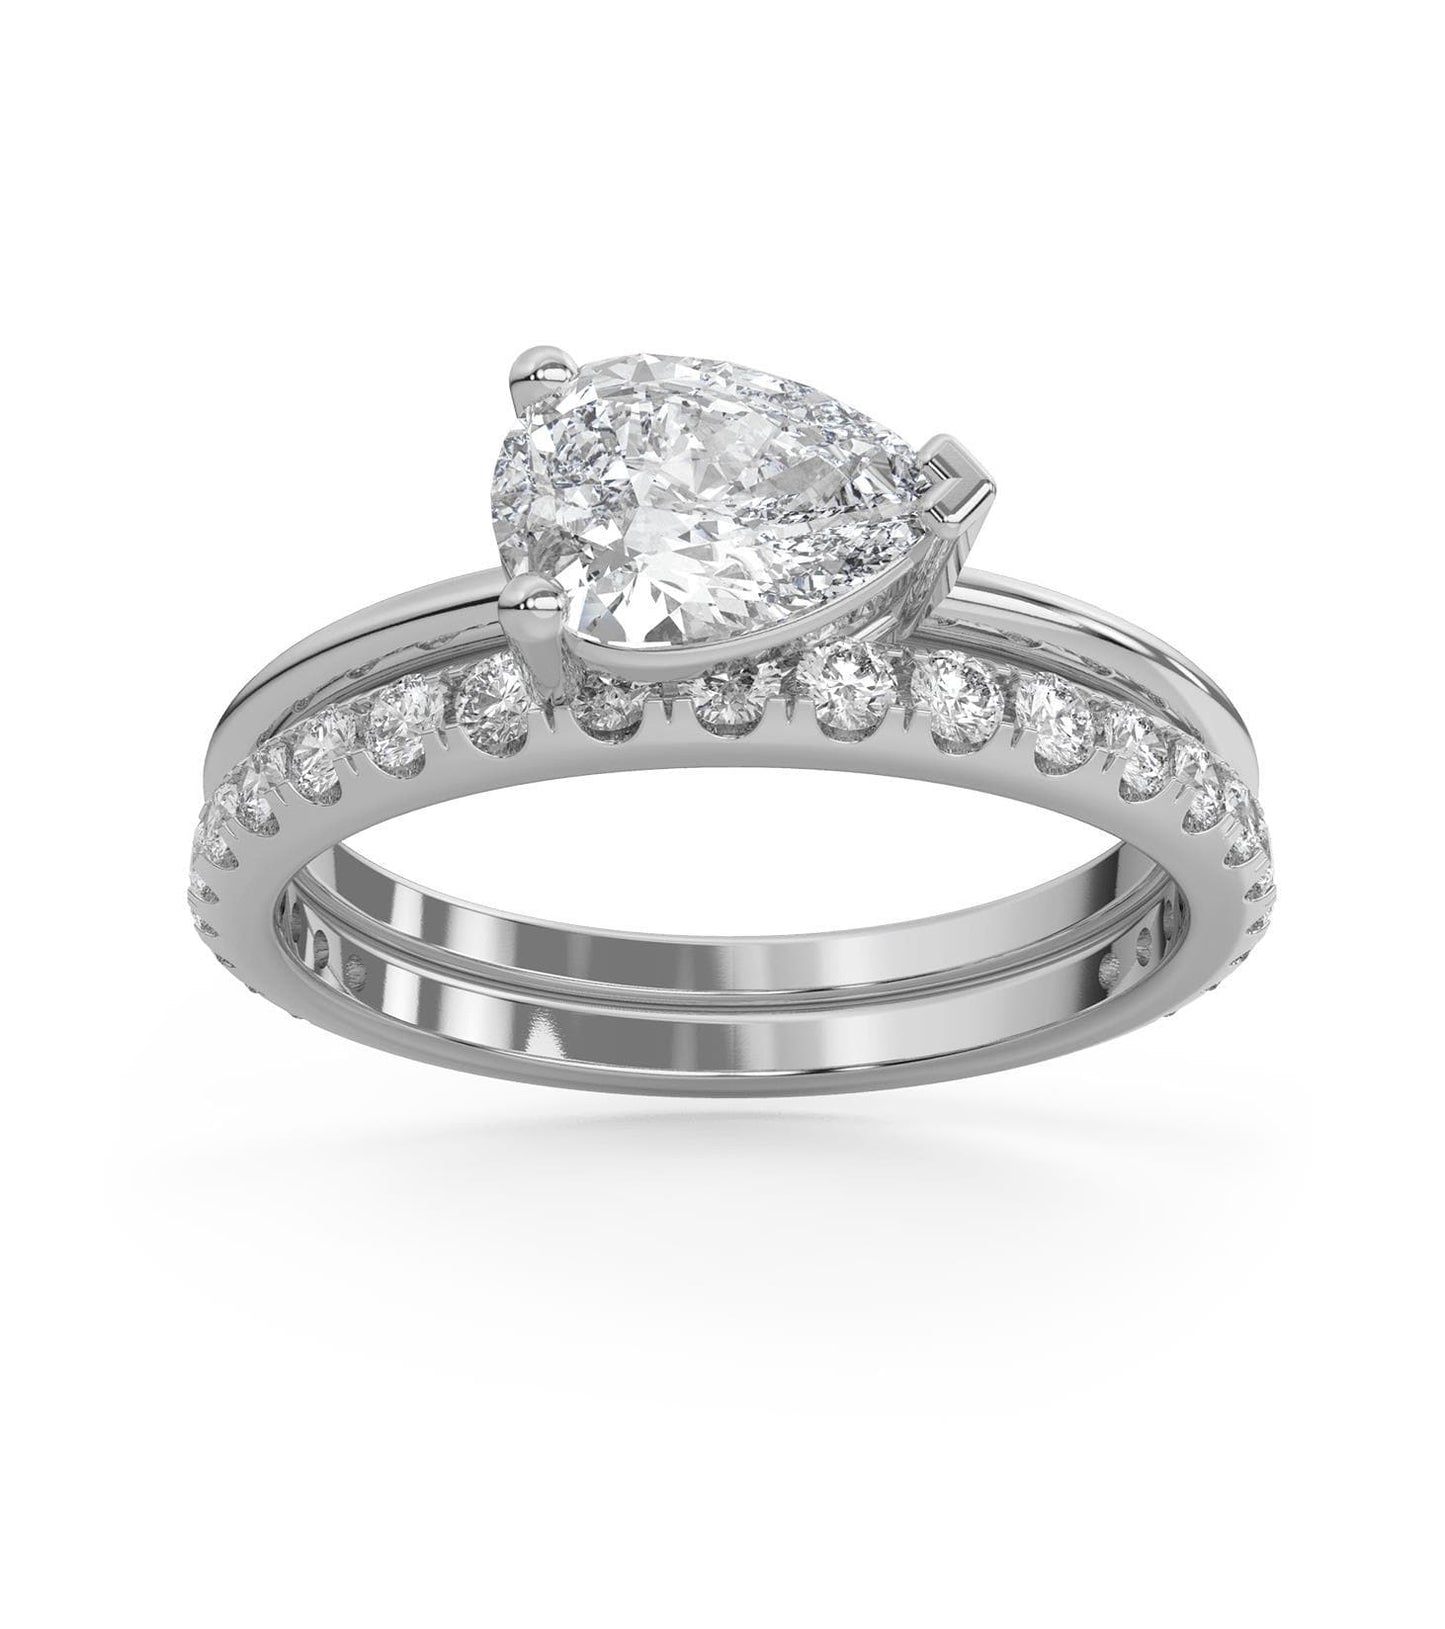 East West Pear Cut Diamond & Pave Band Wedding Set in 14k Gold